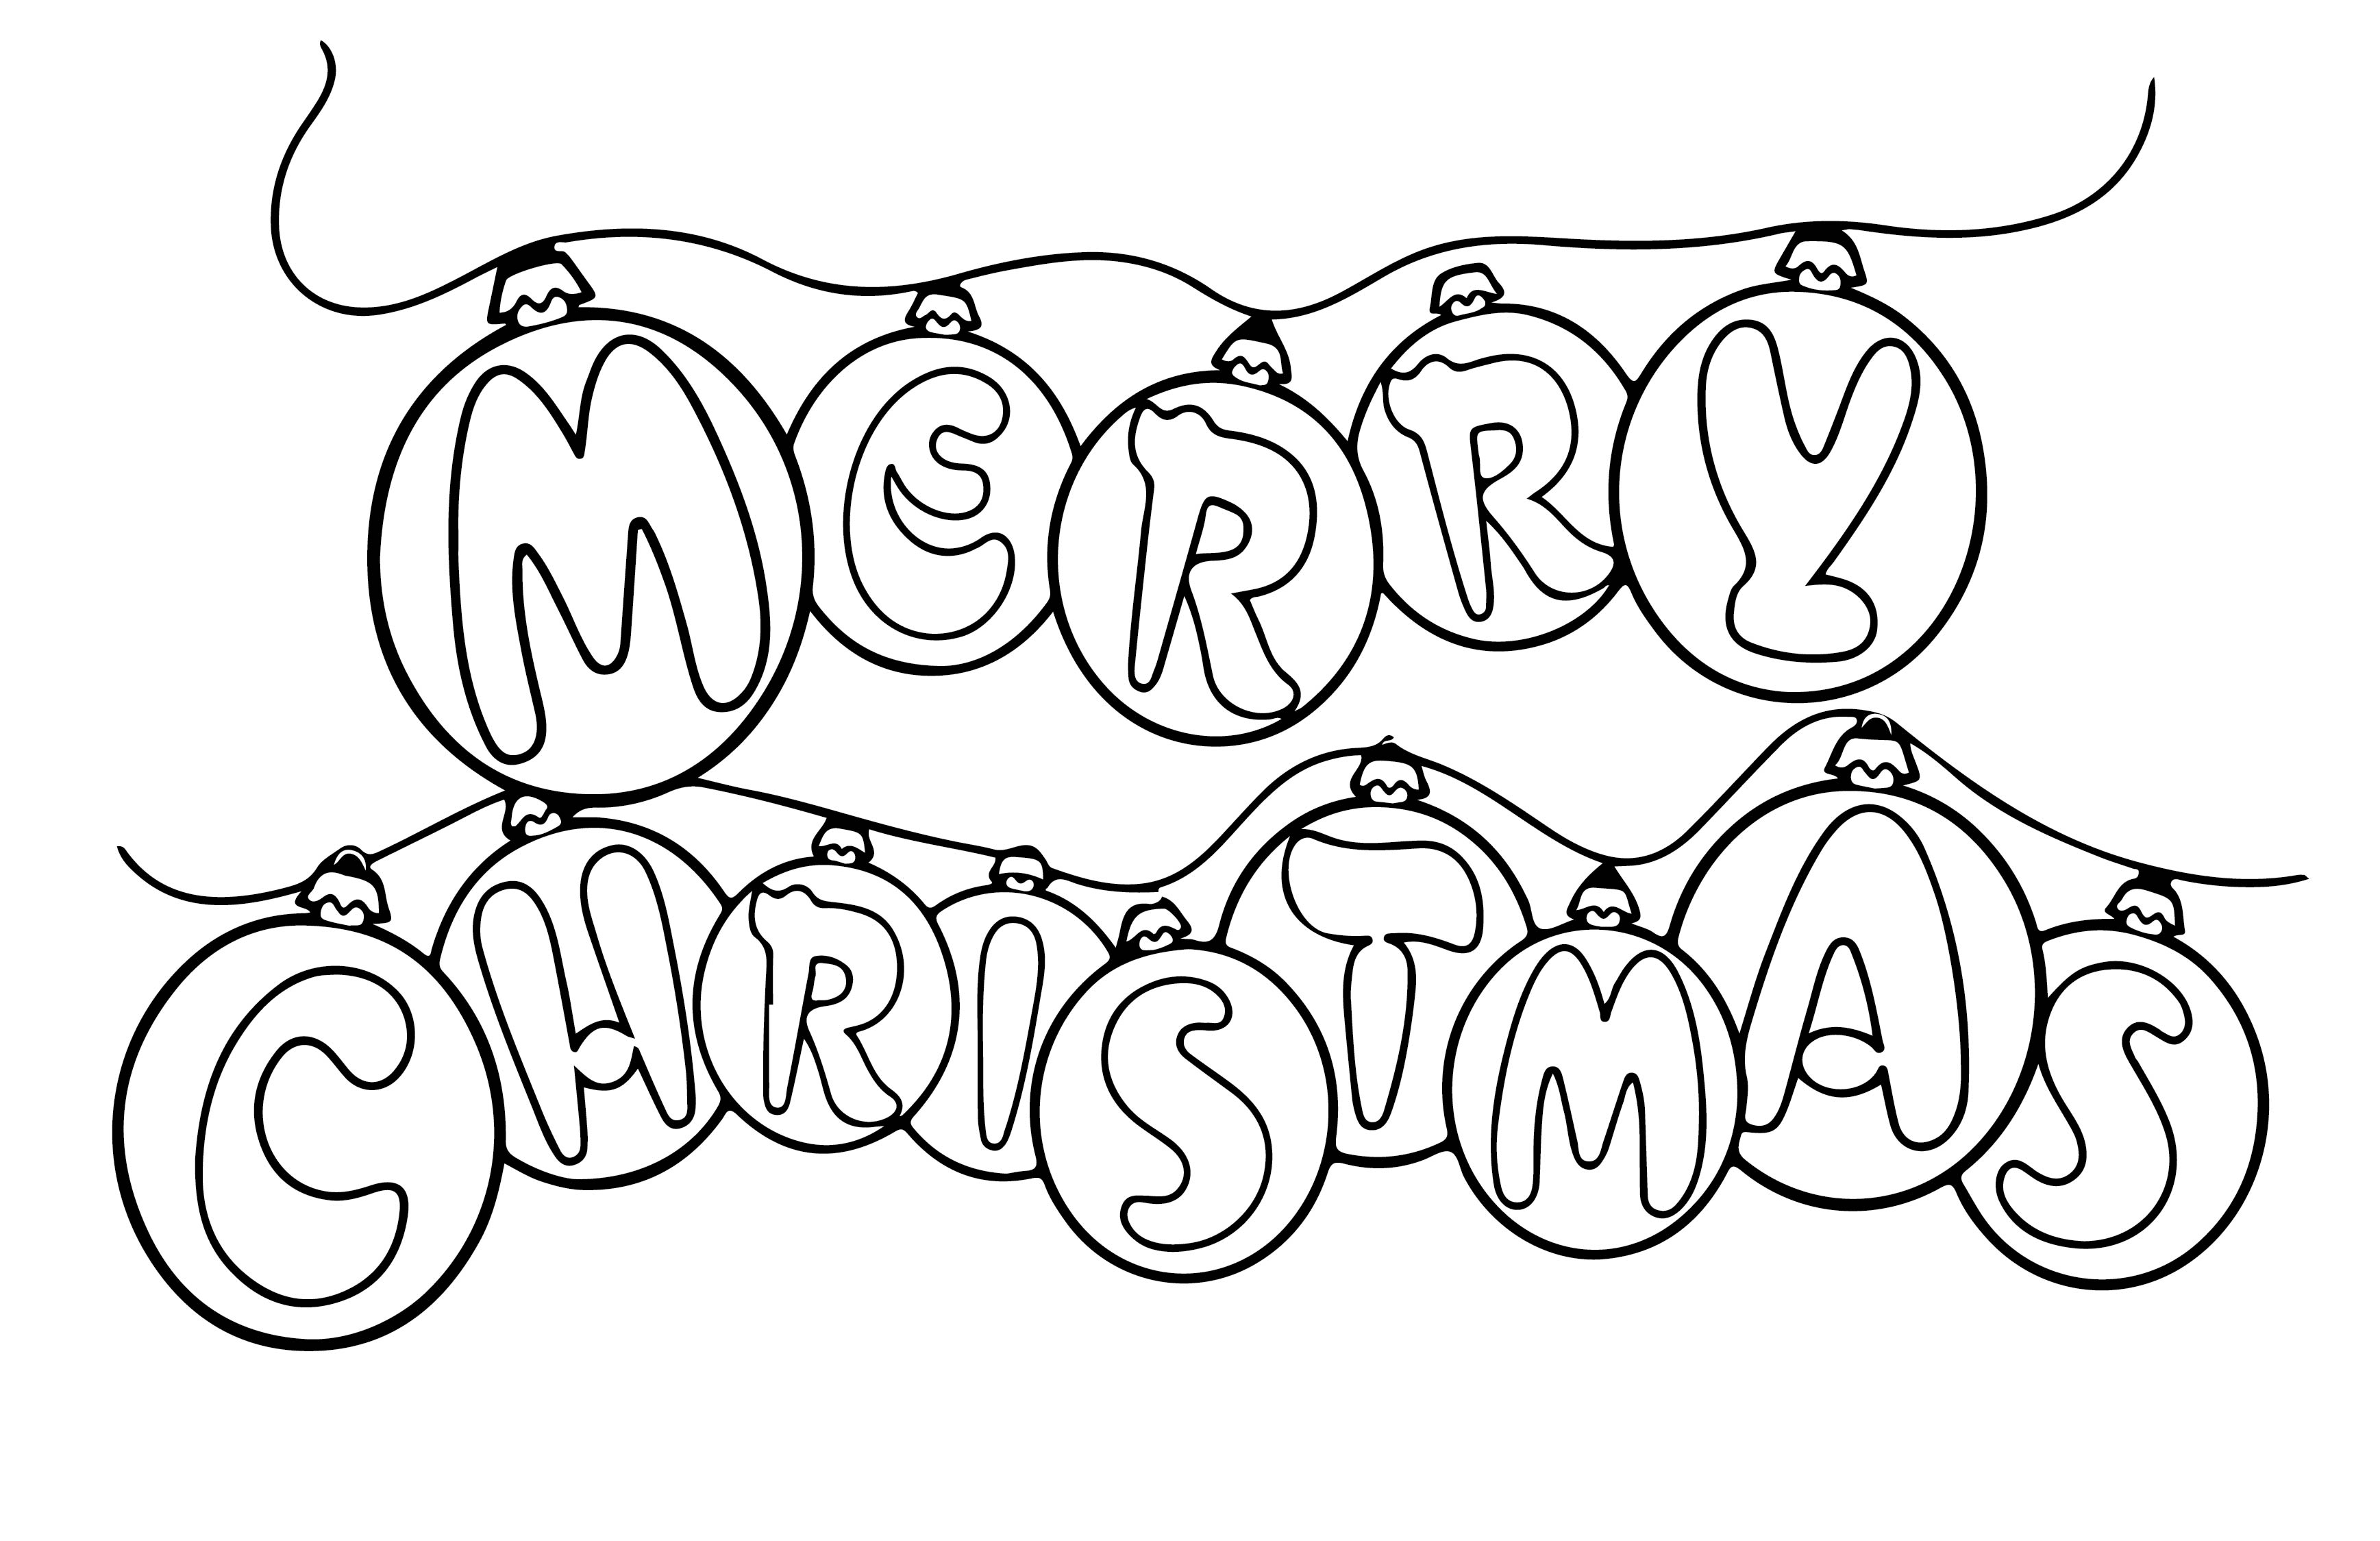 5-best-images-of-christmas-coloring-pages-printable-product-merry